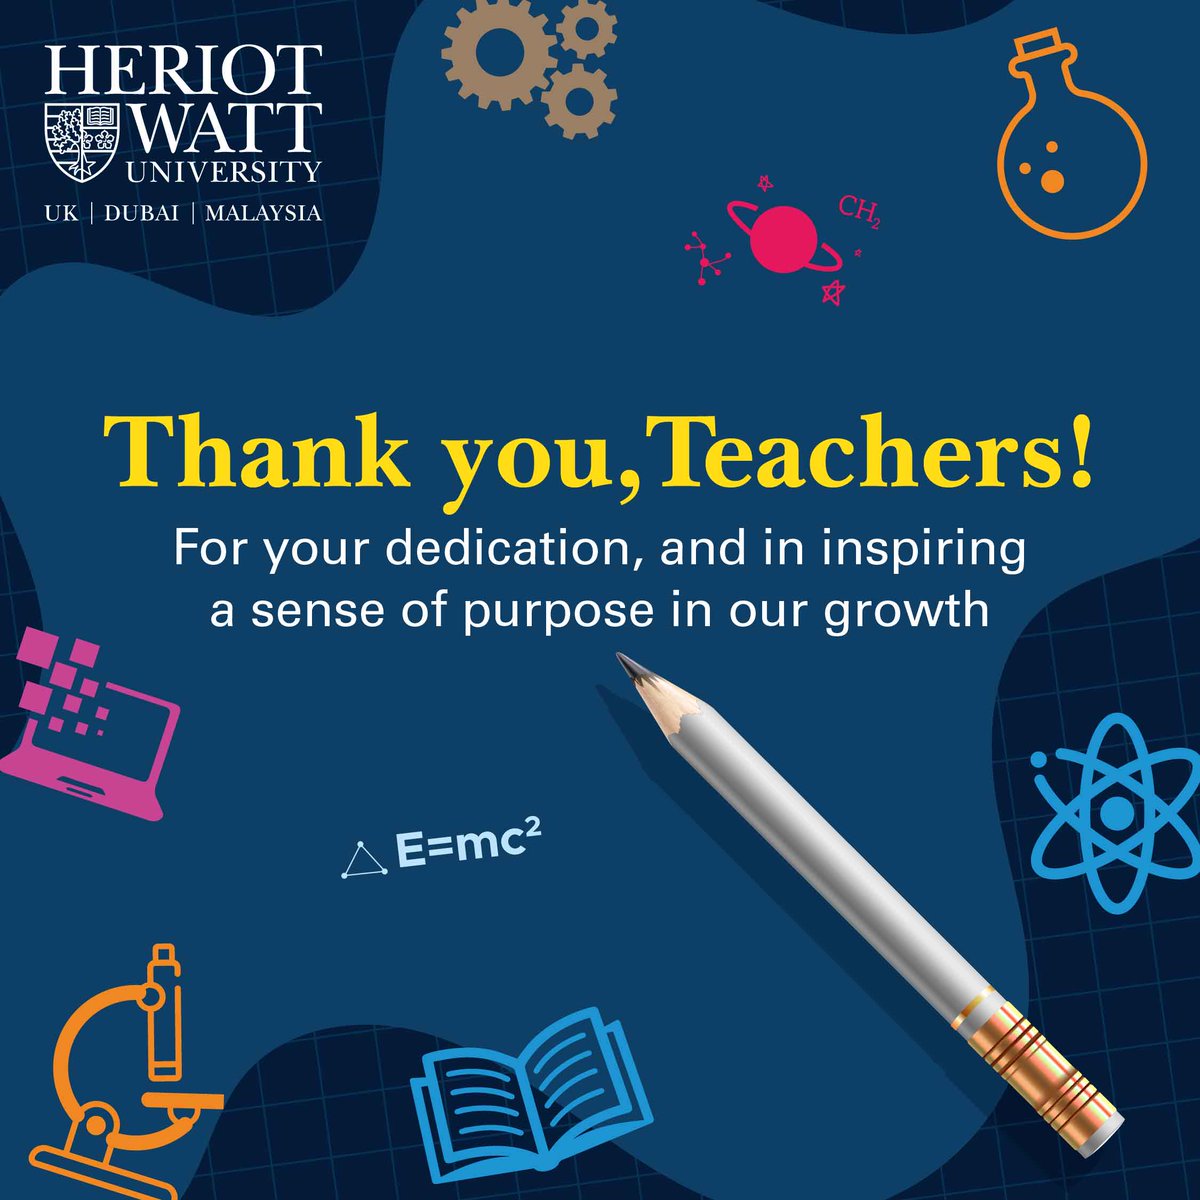 This #TeachersDay, we would like to take a moment to appreciate our amazing educators who inspire a sense of purpose in our journey of growth and who left a positive impact on our lives. 

Happy Teacher's Day from all of us at Heriot-Watt University Malaysia! 

#DrivenByPurpose